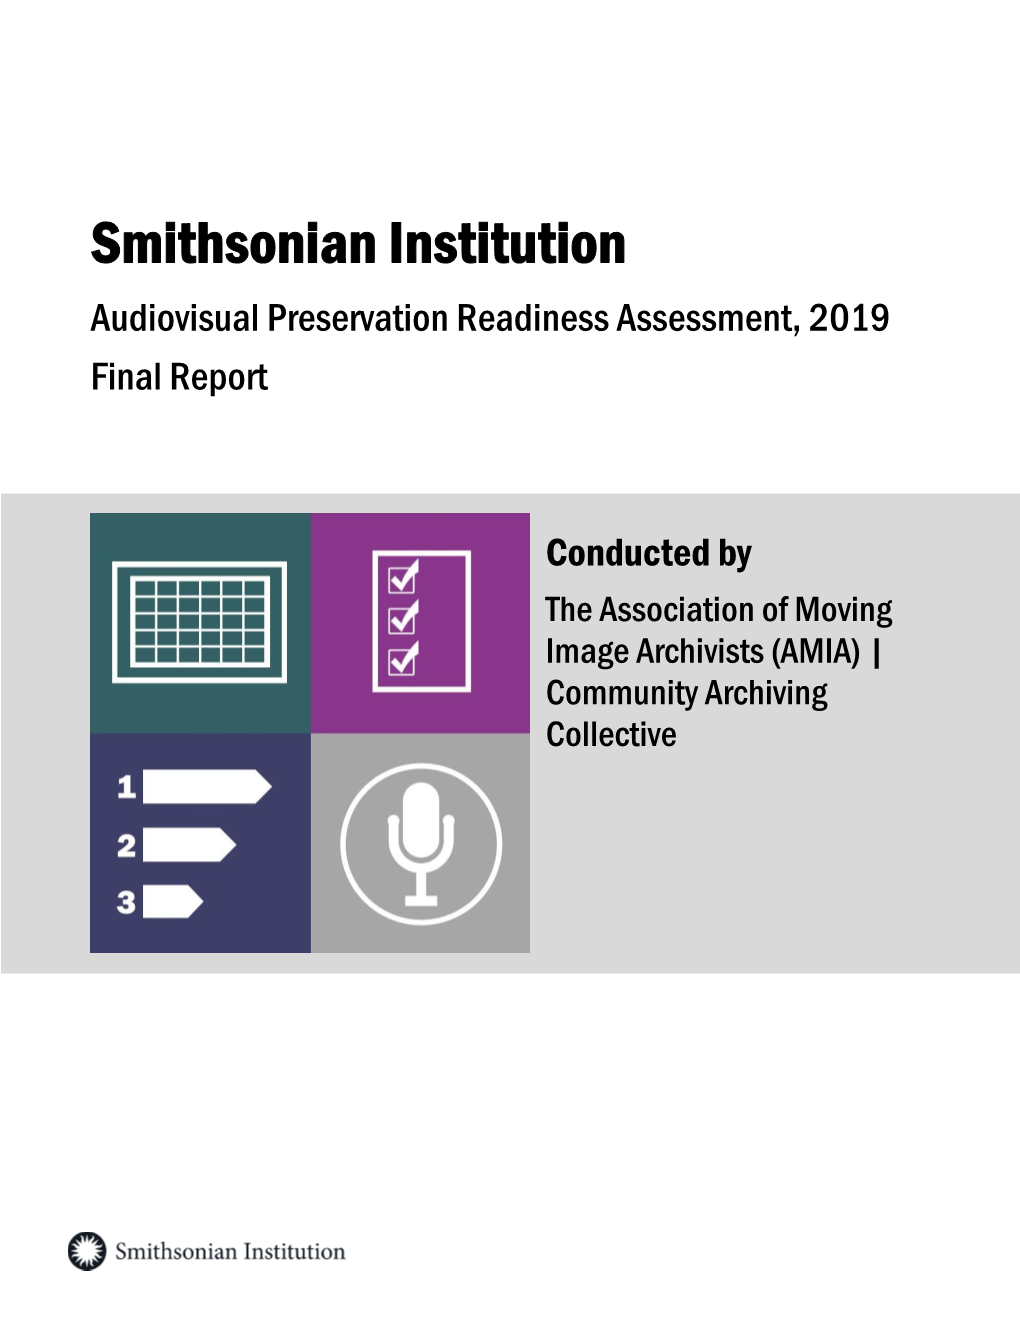 Audiovisual Preservation Readiness Assessment, 2019 Final Report